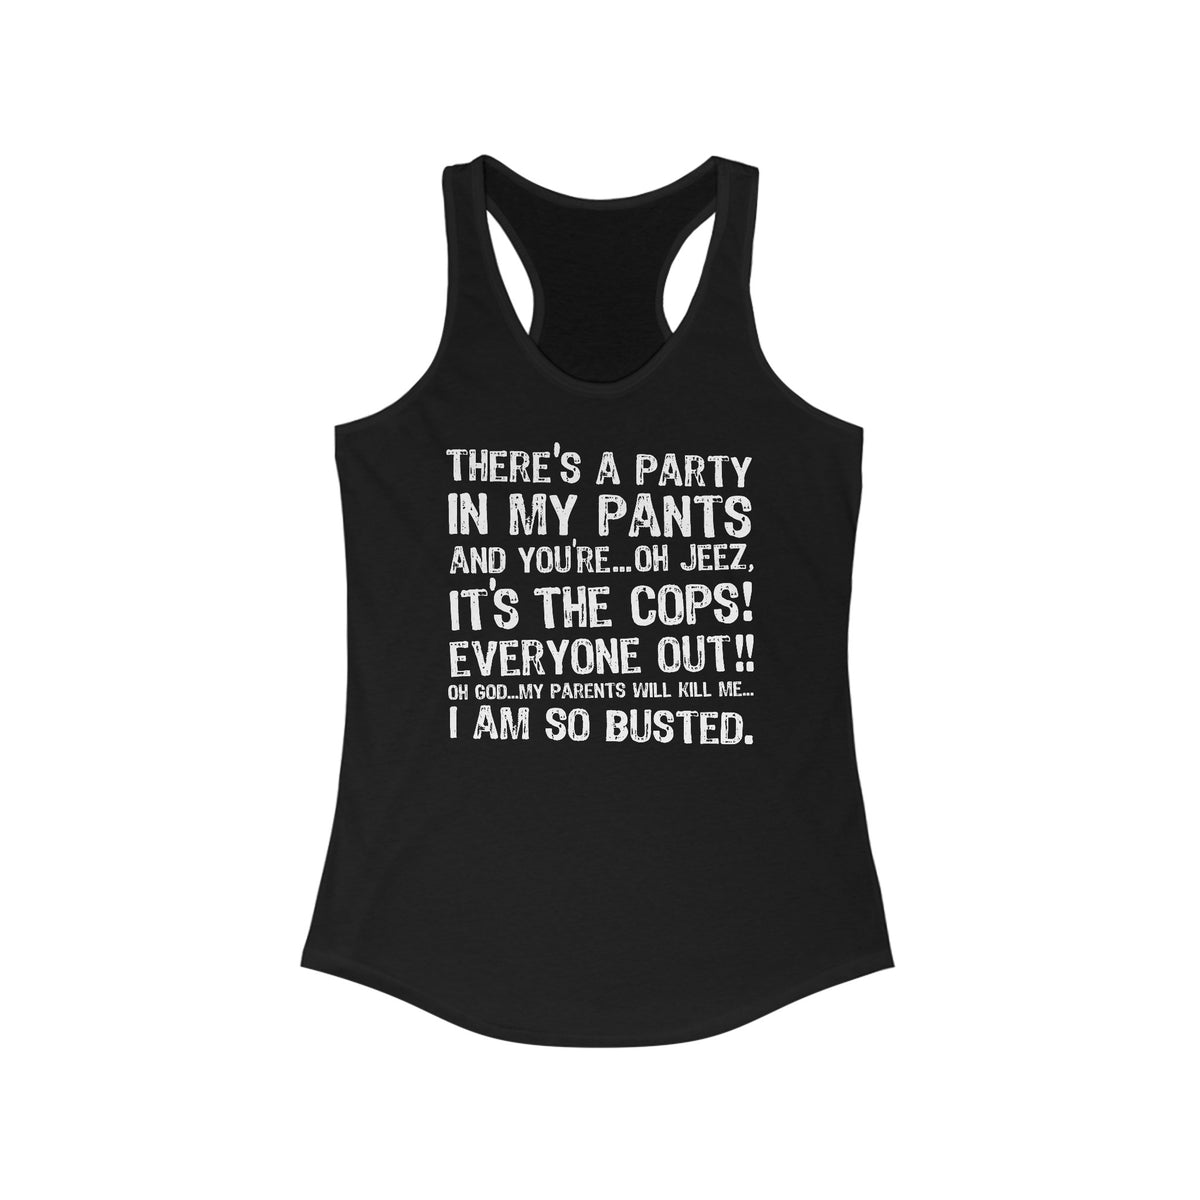 There's A Party In My Pants And You're... Oh Jeez It's The Cops! - Women’s Racerback Tank